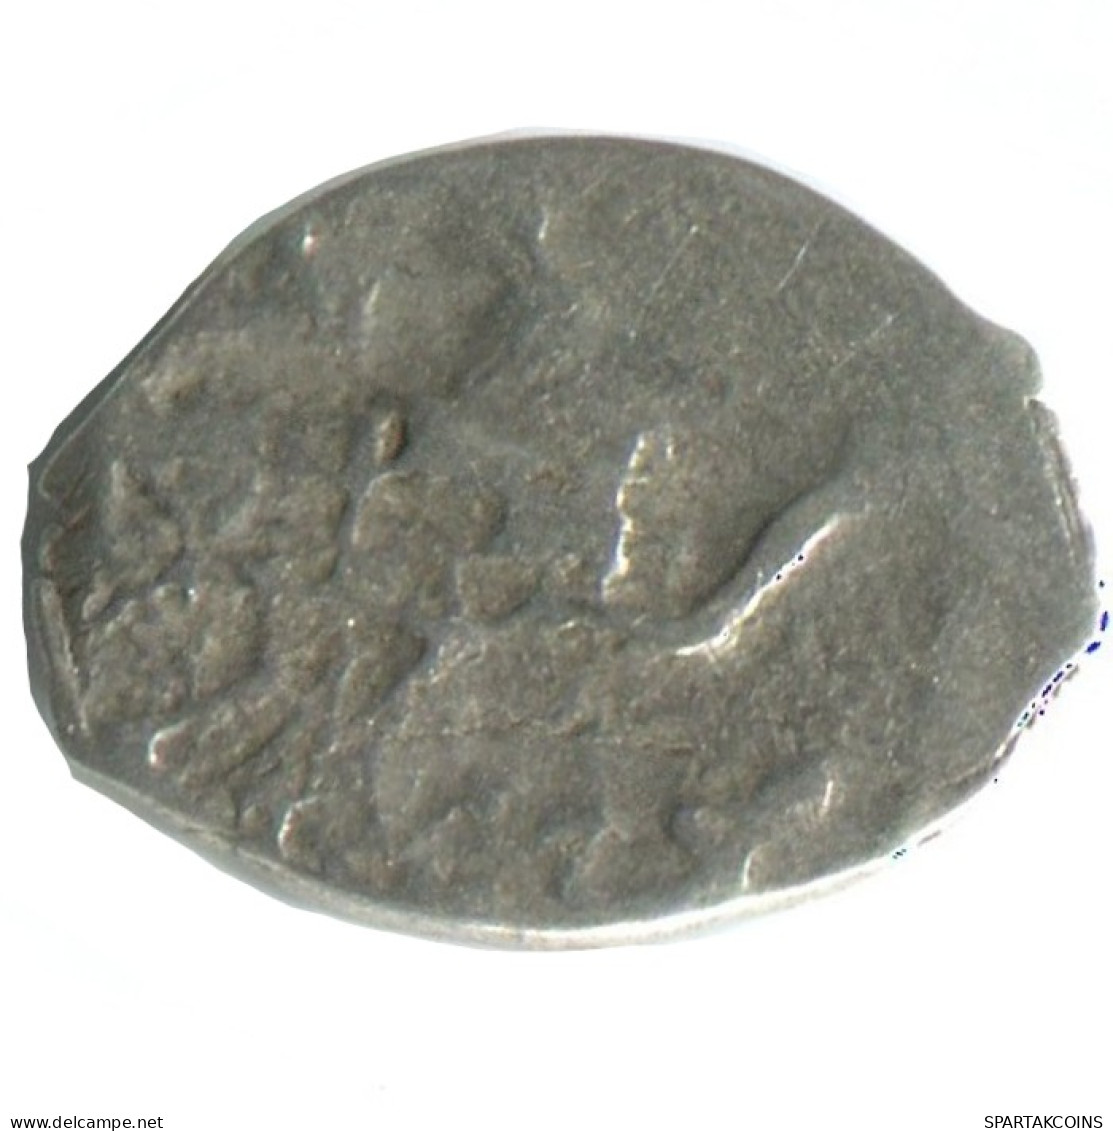 RUSSIA 1702 KOPECK PETER I OLD Mint MOSCOW SILVER 0.4g/8mm #AB632.10.U.A - Russland